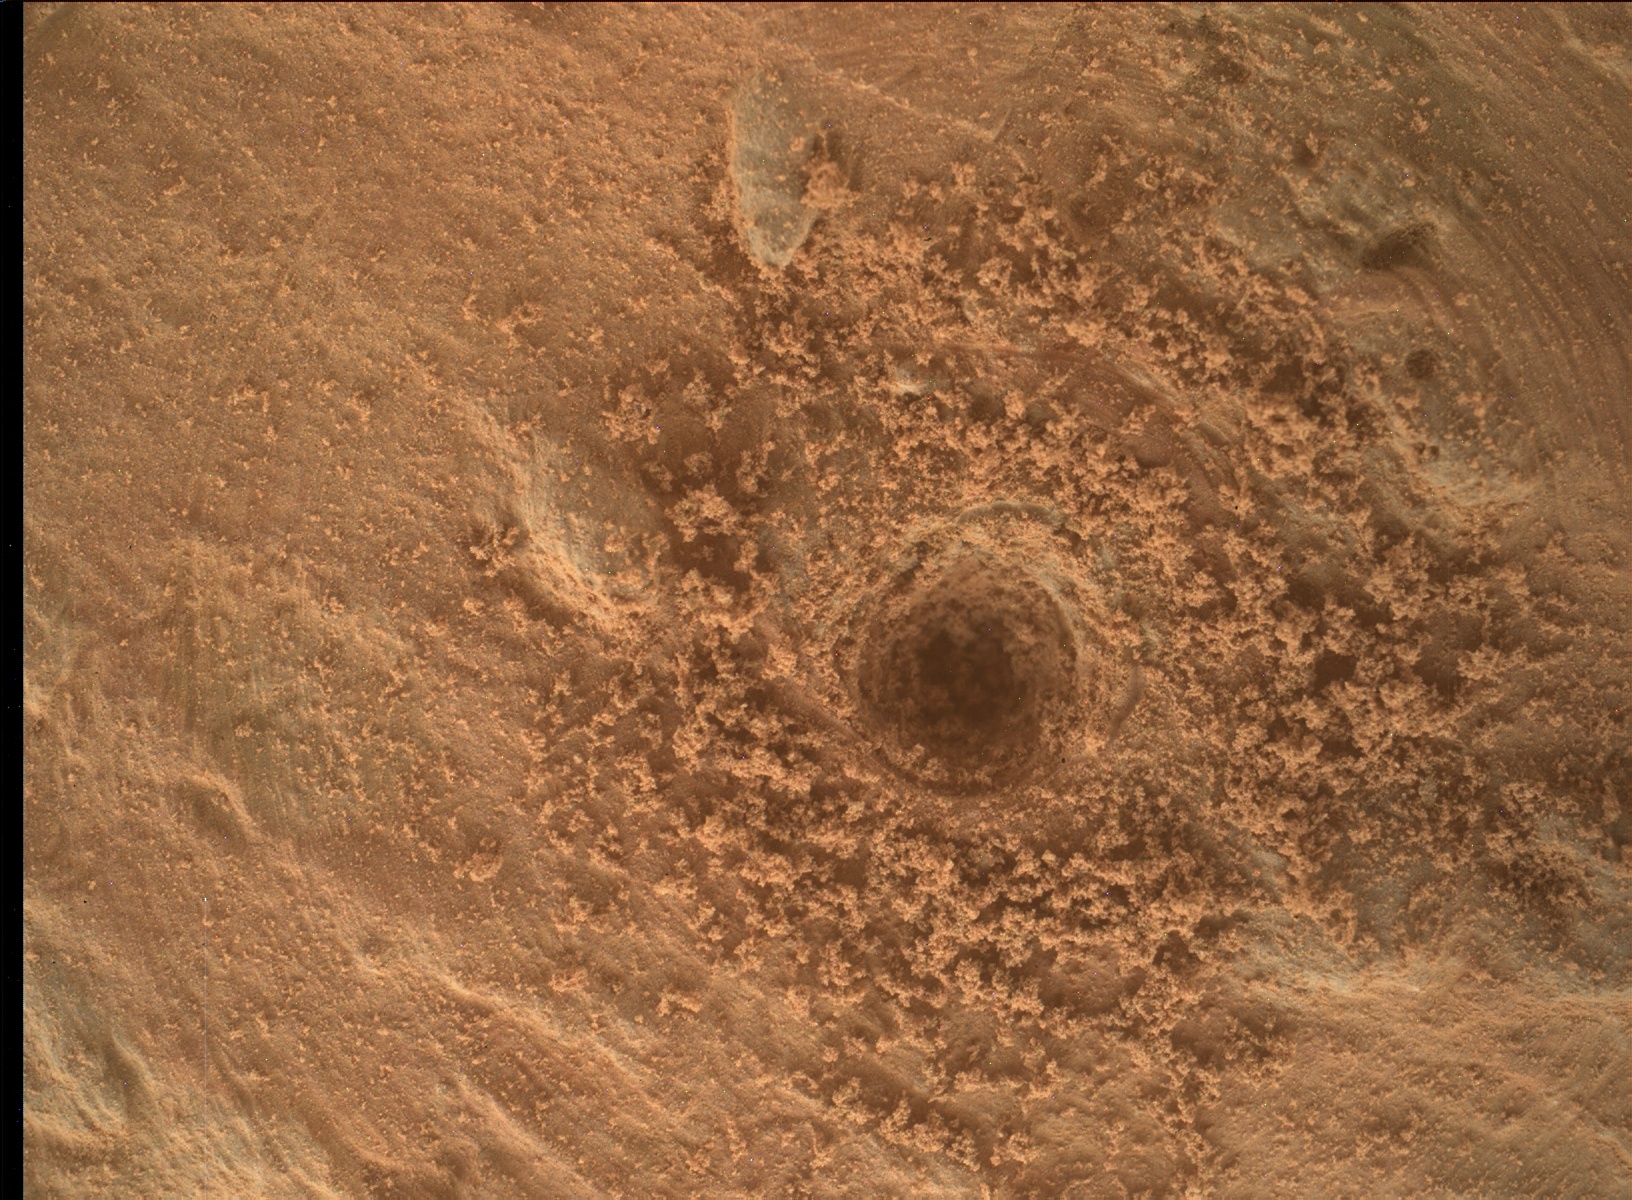 Nasa's Mars rover Curiosity acquired this image using its Mars Hand Lens Imager (MAHLI) on Sol 3203